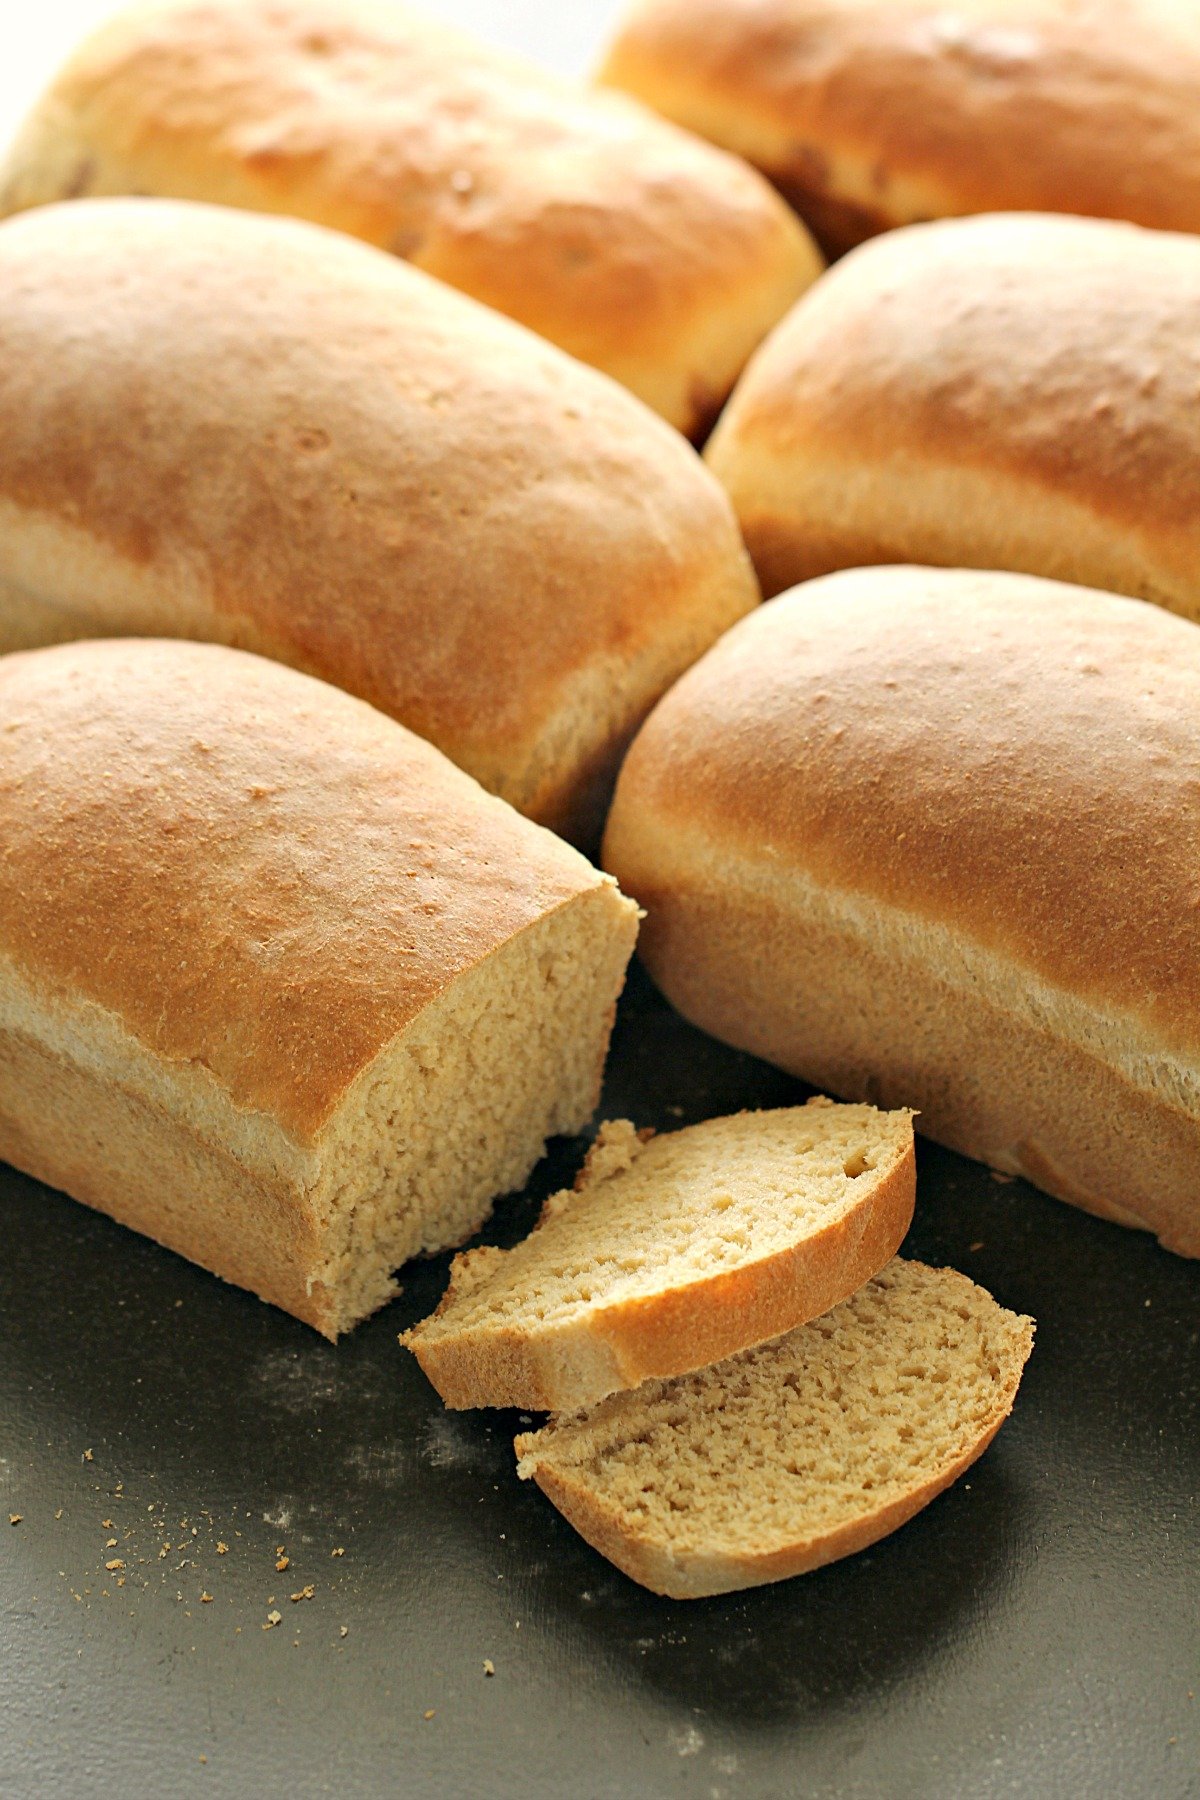 Make 6 Loaves of Whole Wheat Bread in ONE hour Recipe!